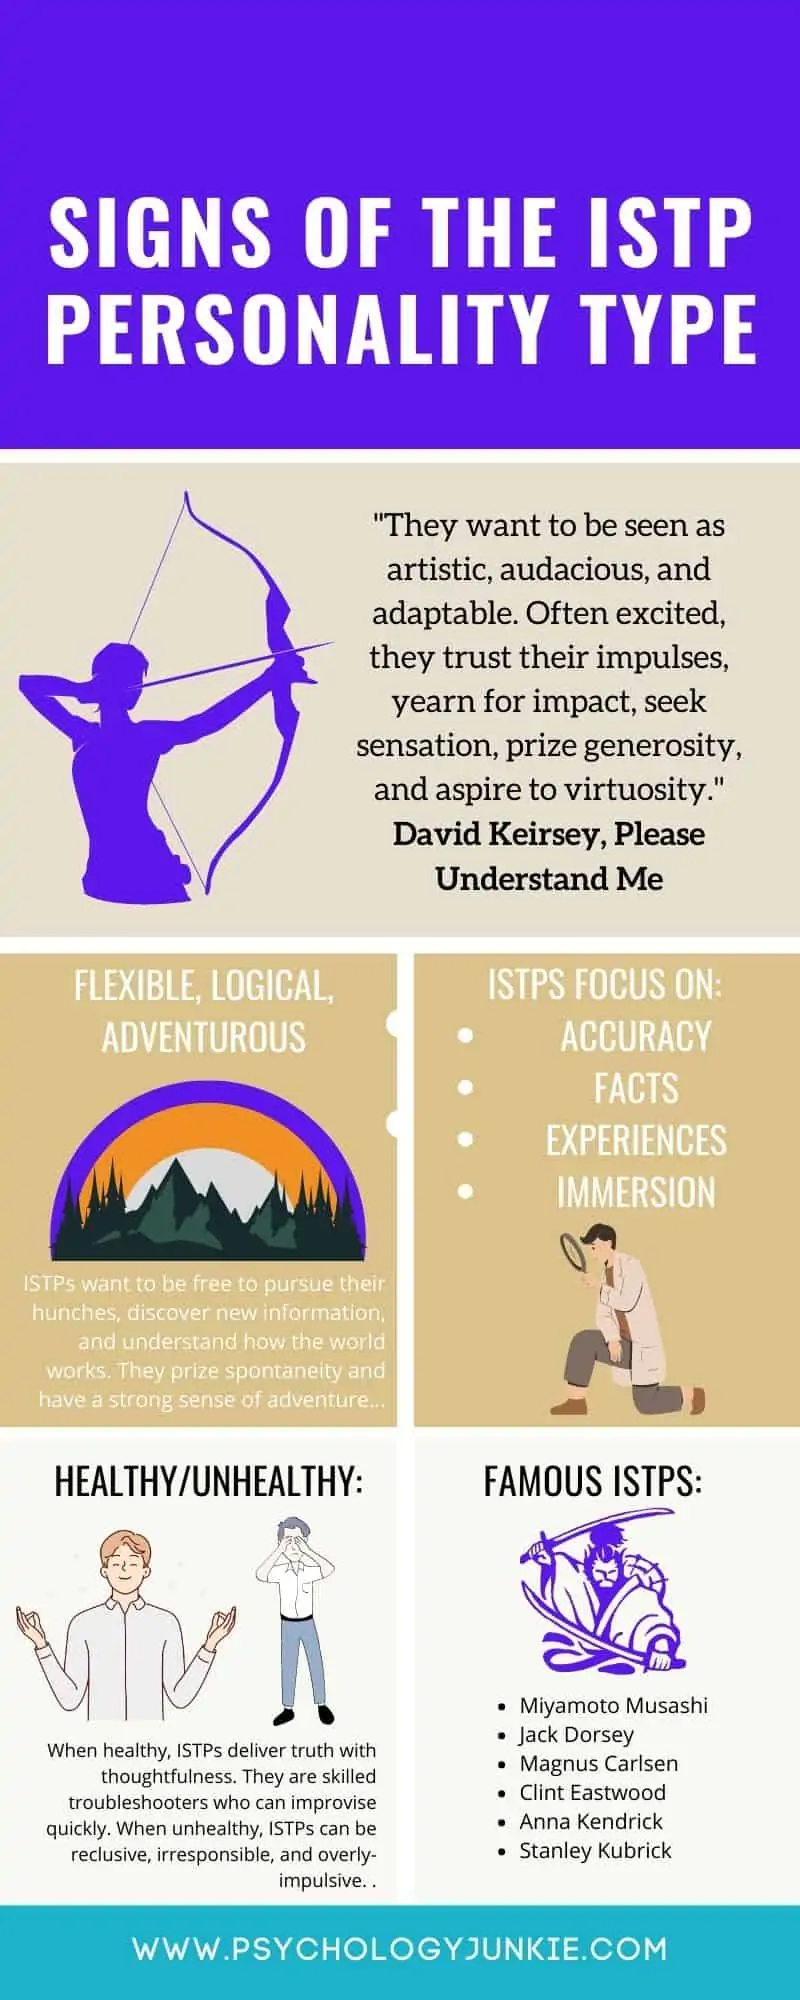 How to Tell if You're an ISTJ vs ISTP